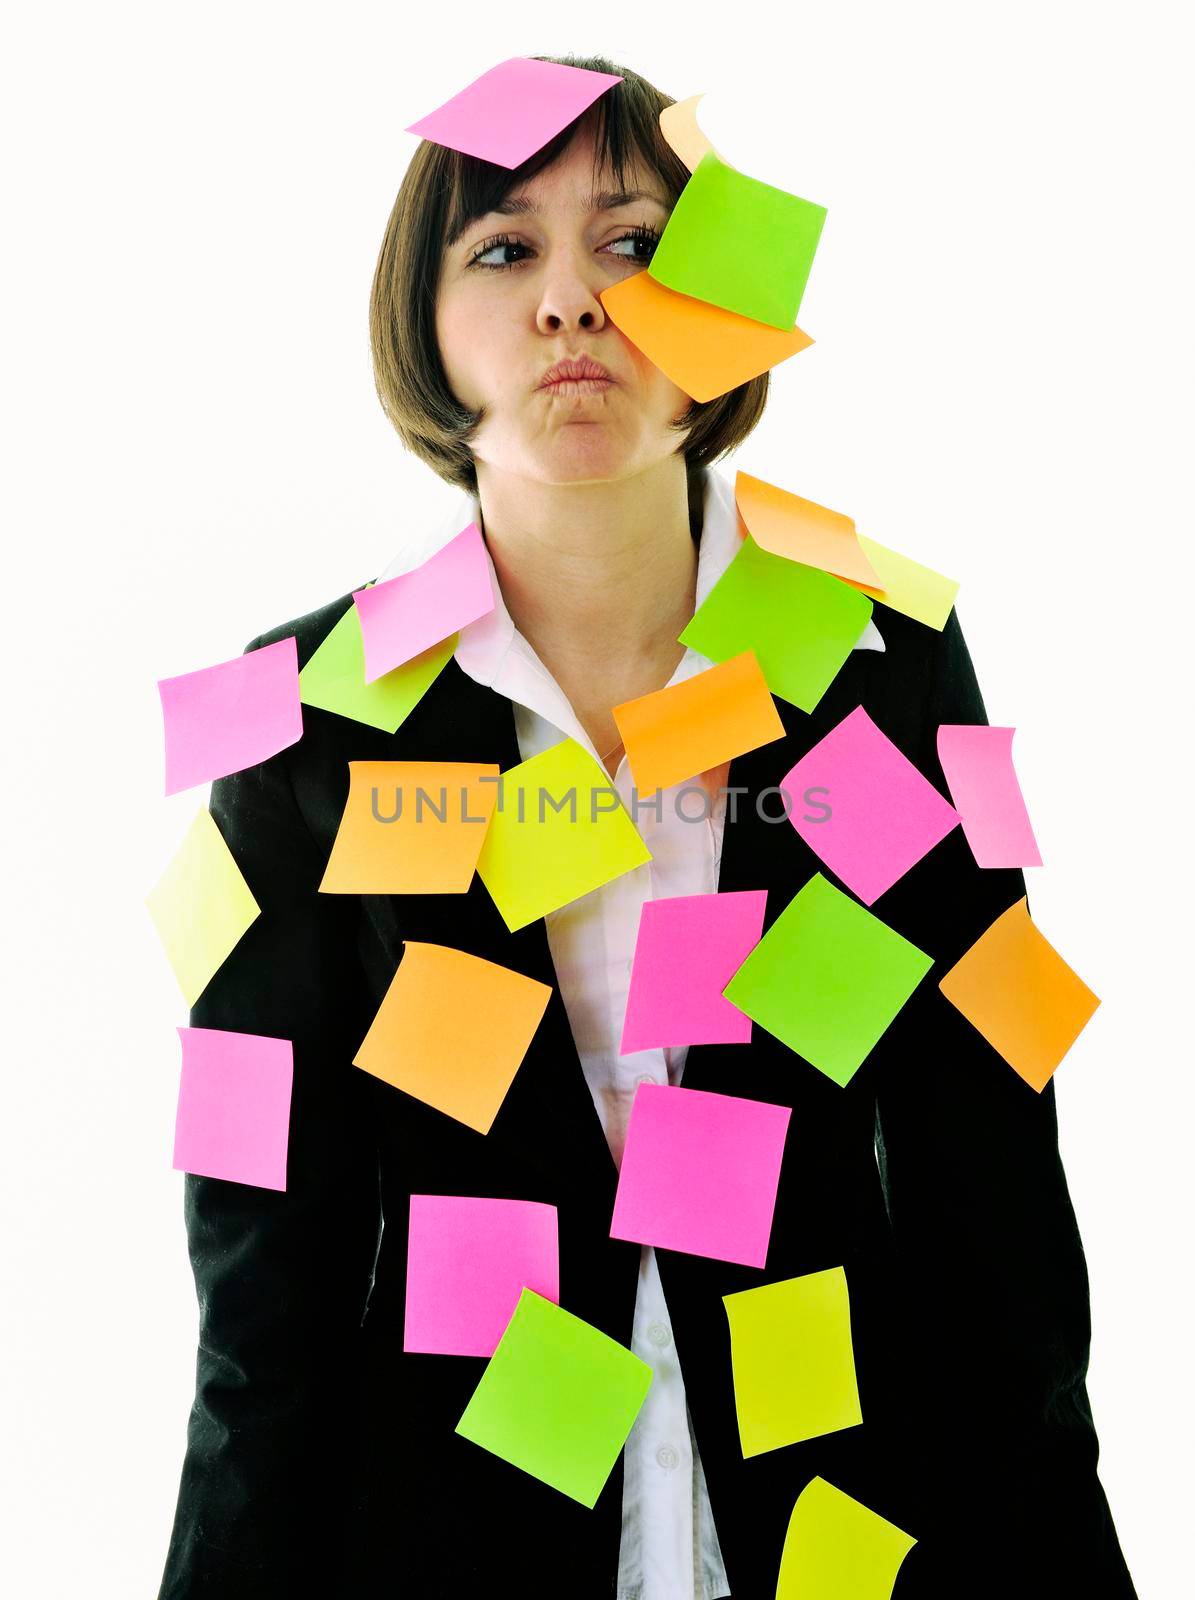 one frustrated young business woman with many of post it representing concept memory and frustration on work